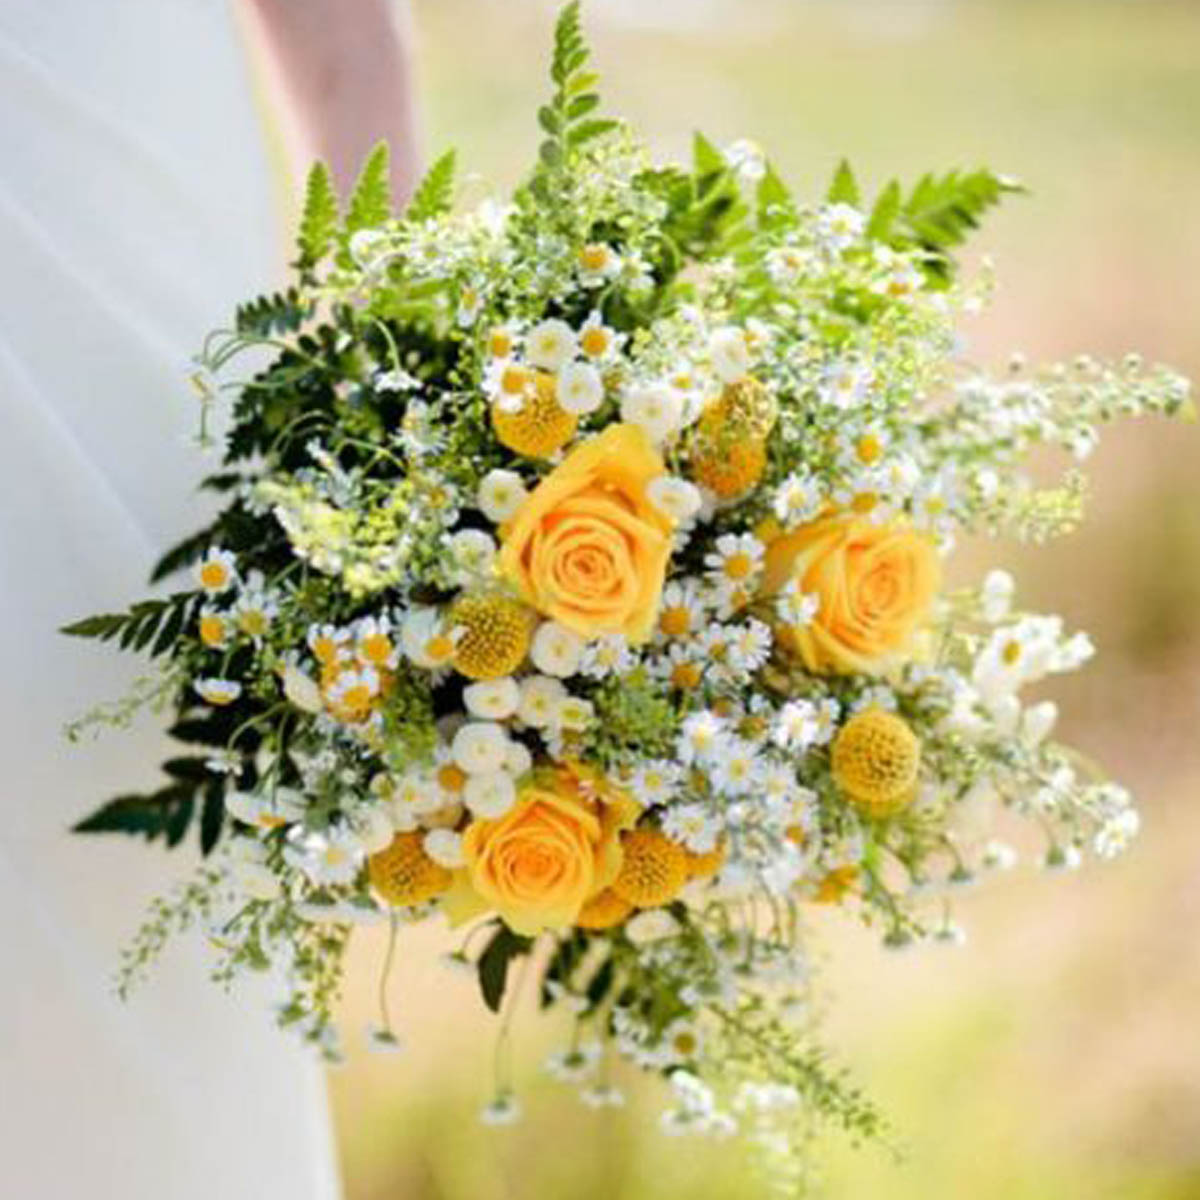 sunny-bouquets-with-yellow-roses-featured